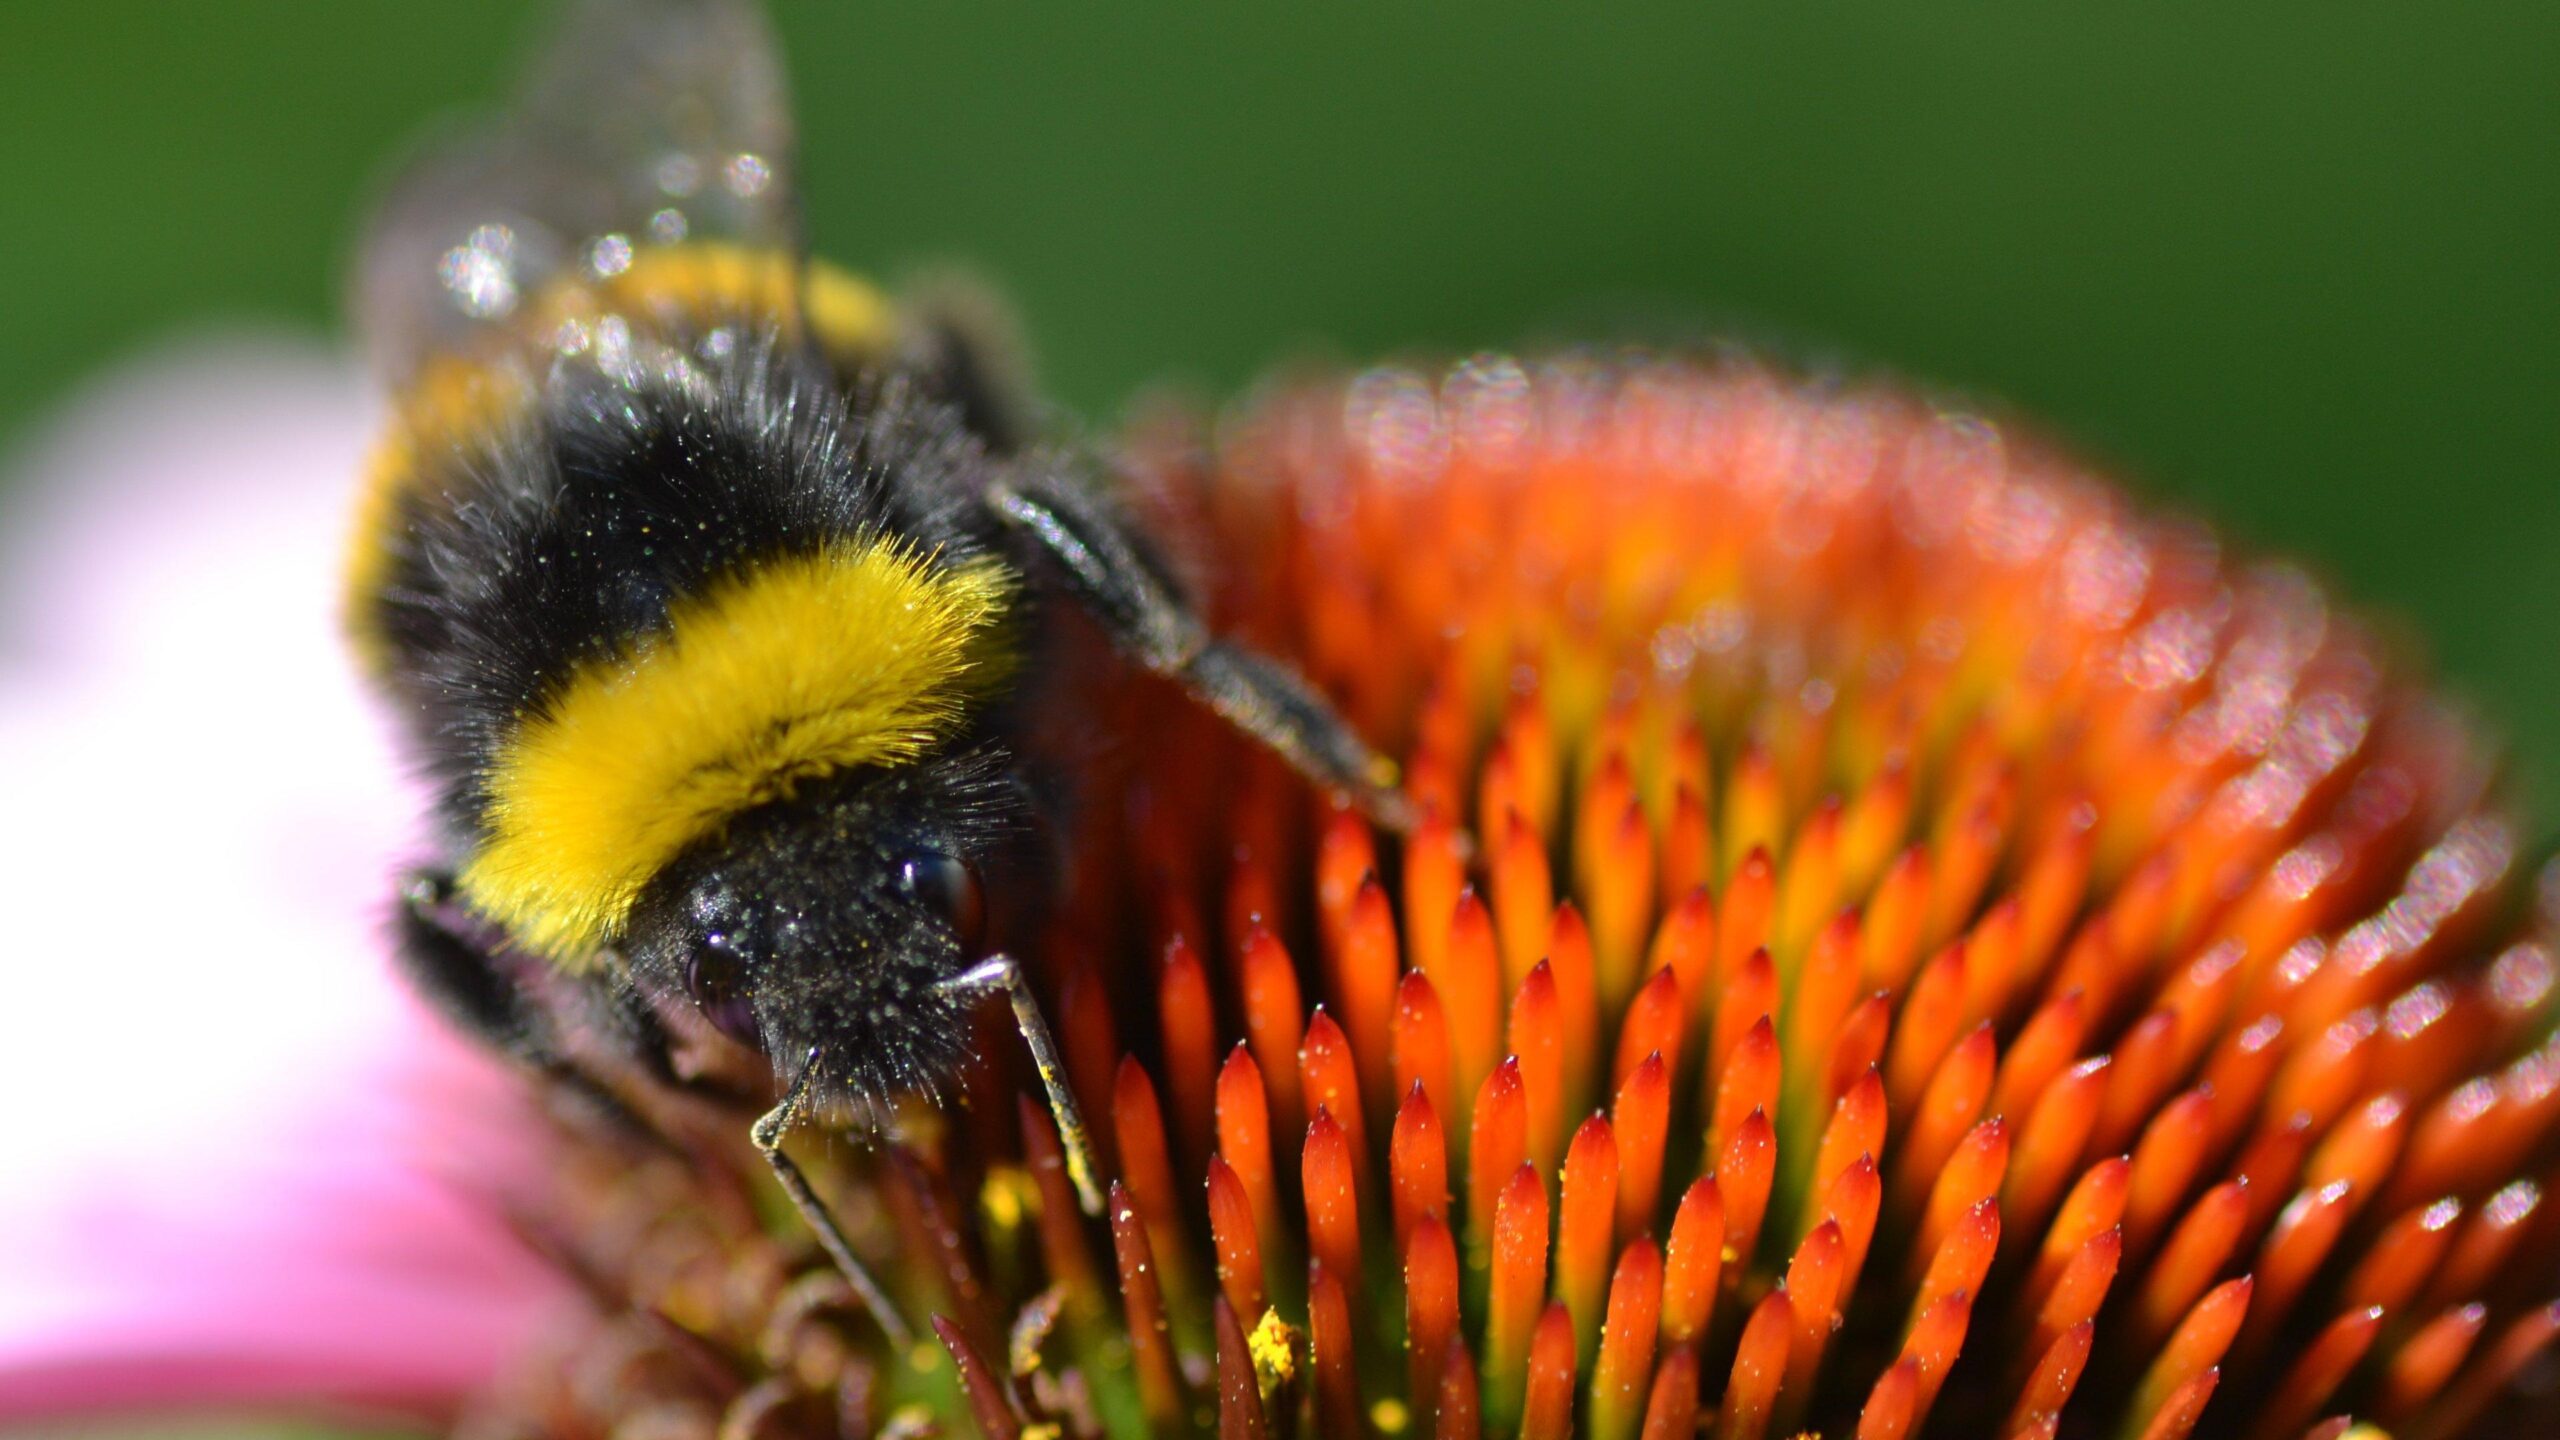 Bumblebee Insect Hd Wallpaper 4k Download Full Screen, Bumblebee Insect, Animal